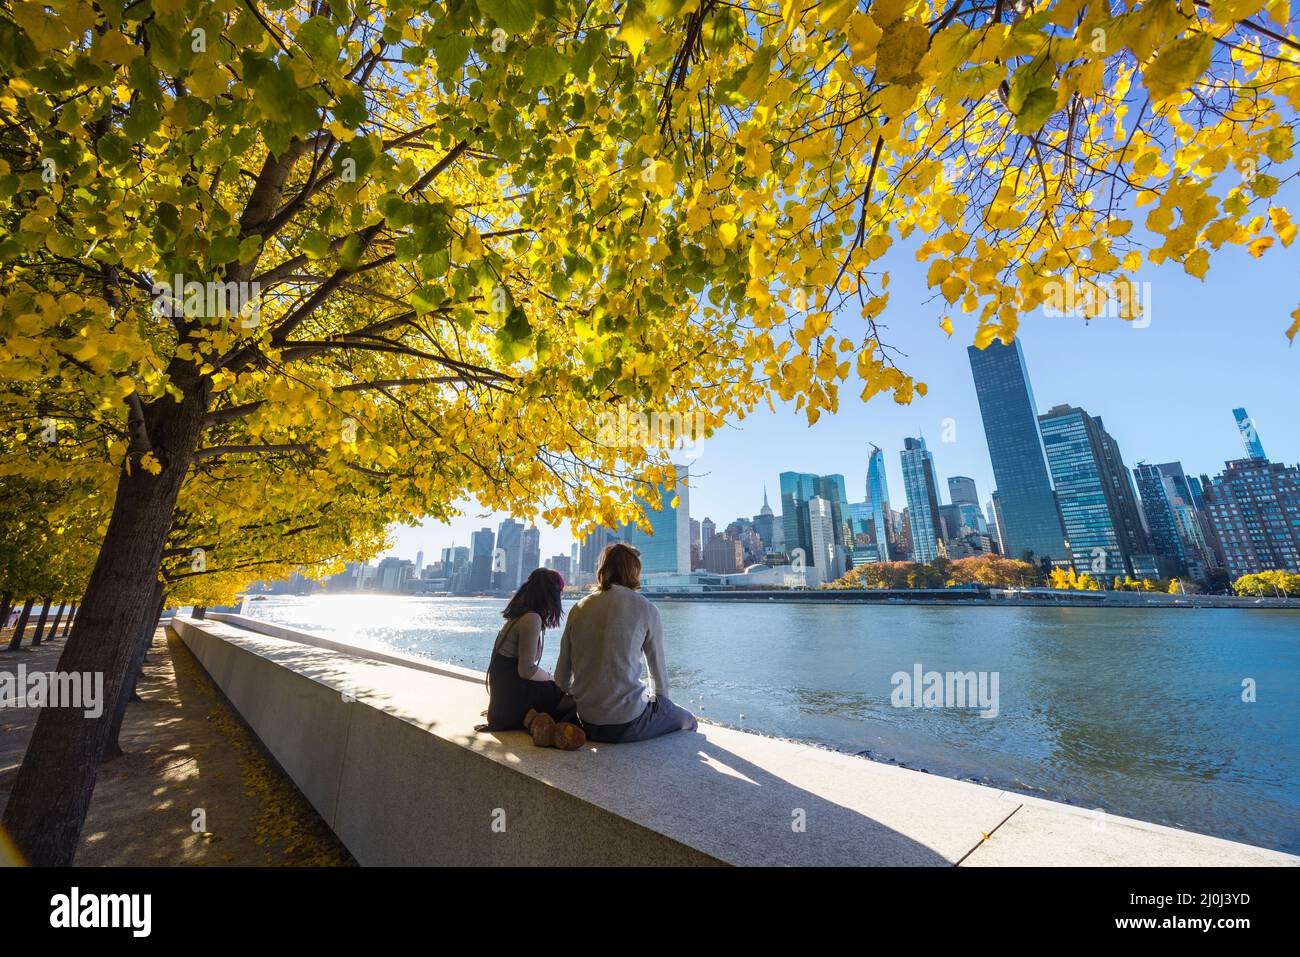 Autumn leaf color trees glow in Roosevelt Island NYC. Stock Photo